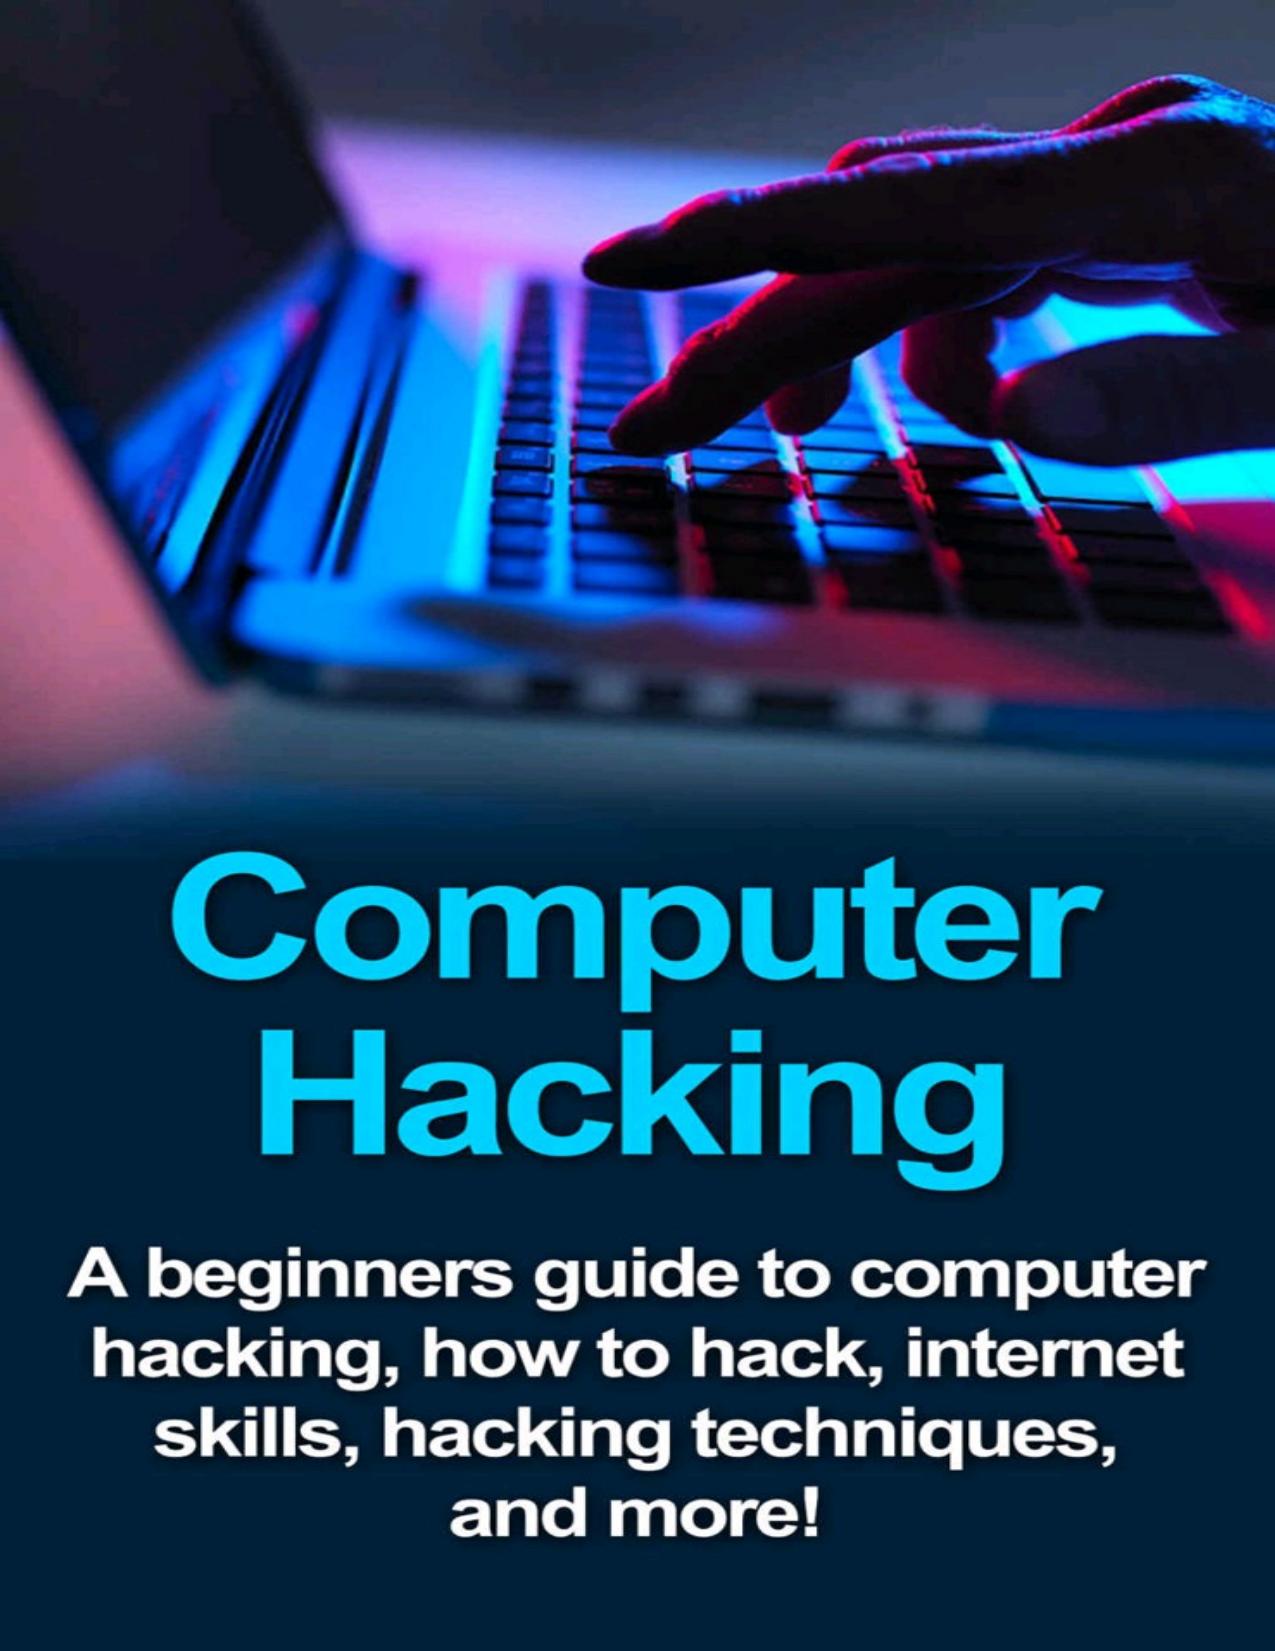 Computer Hacking: A beginners guide to computer hacking, how to hack, internet skills, hacking techniques, and more!